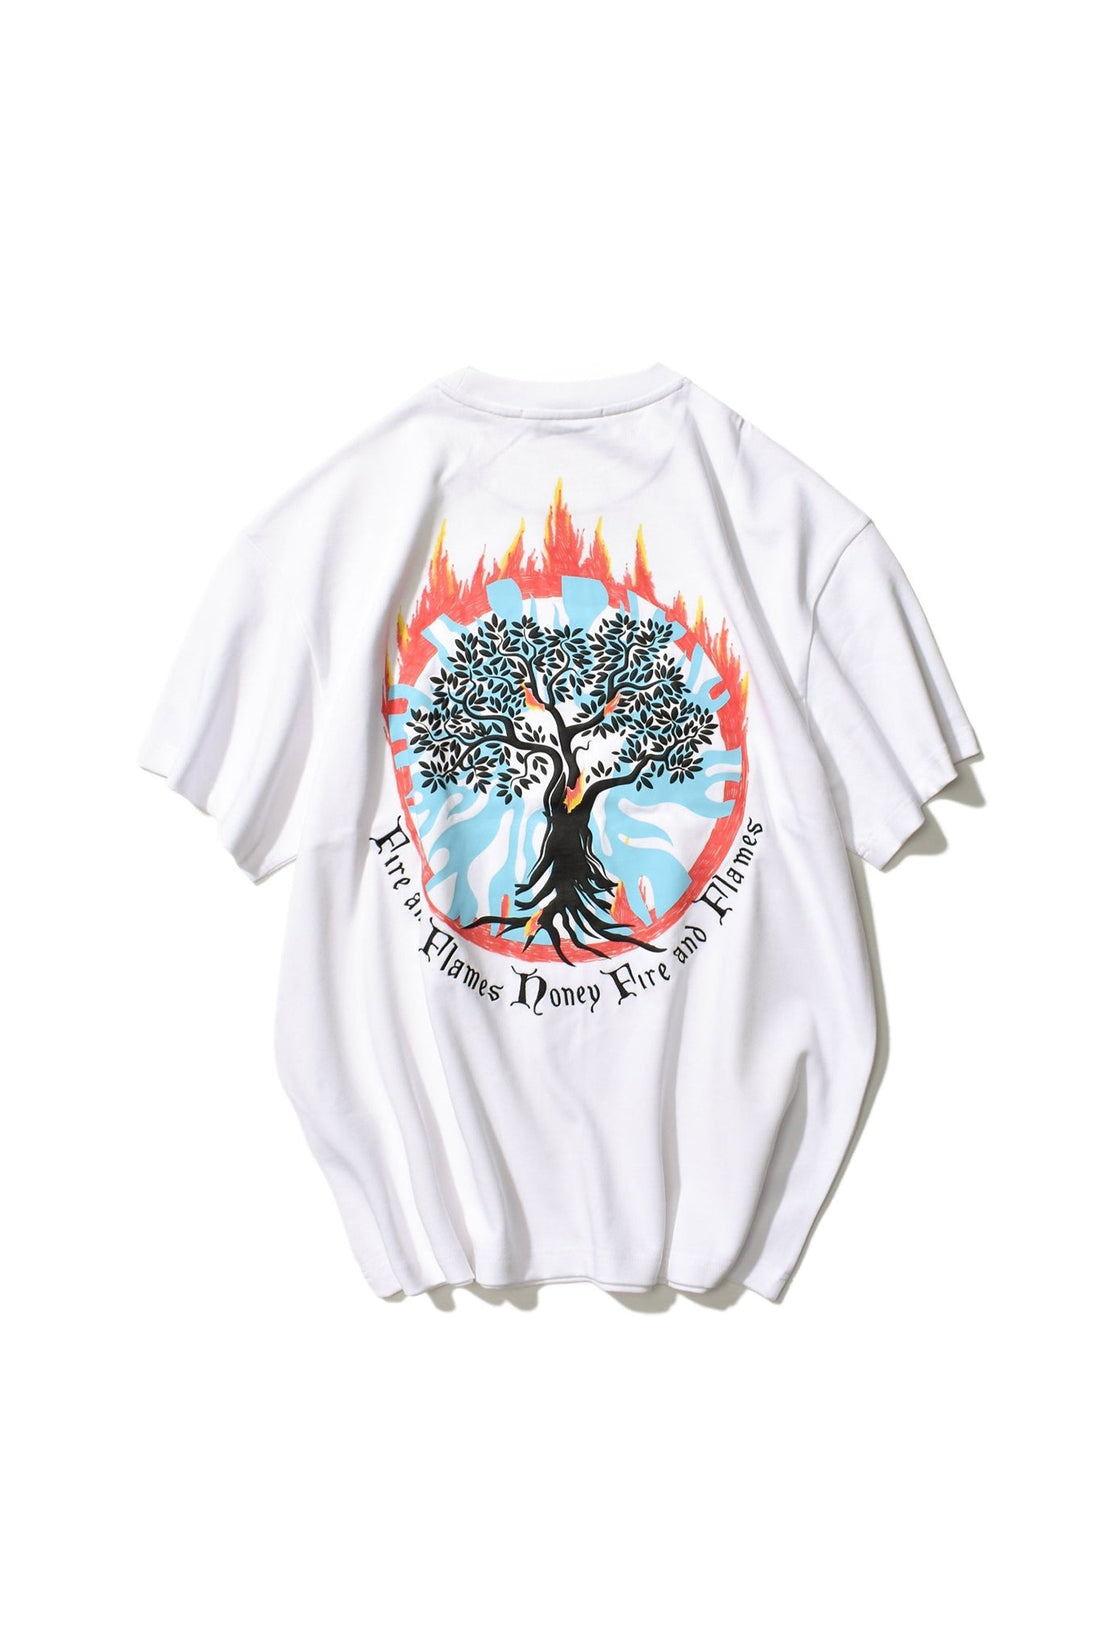 SACRED TREE T-SHIRT WHITE Acupuncture